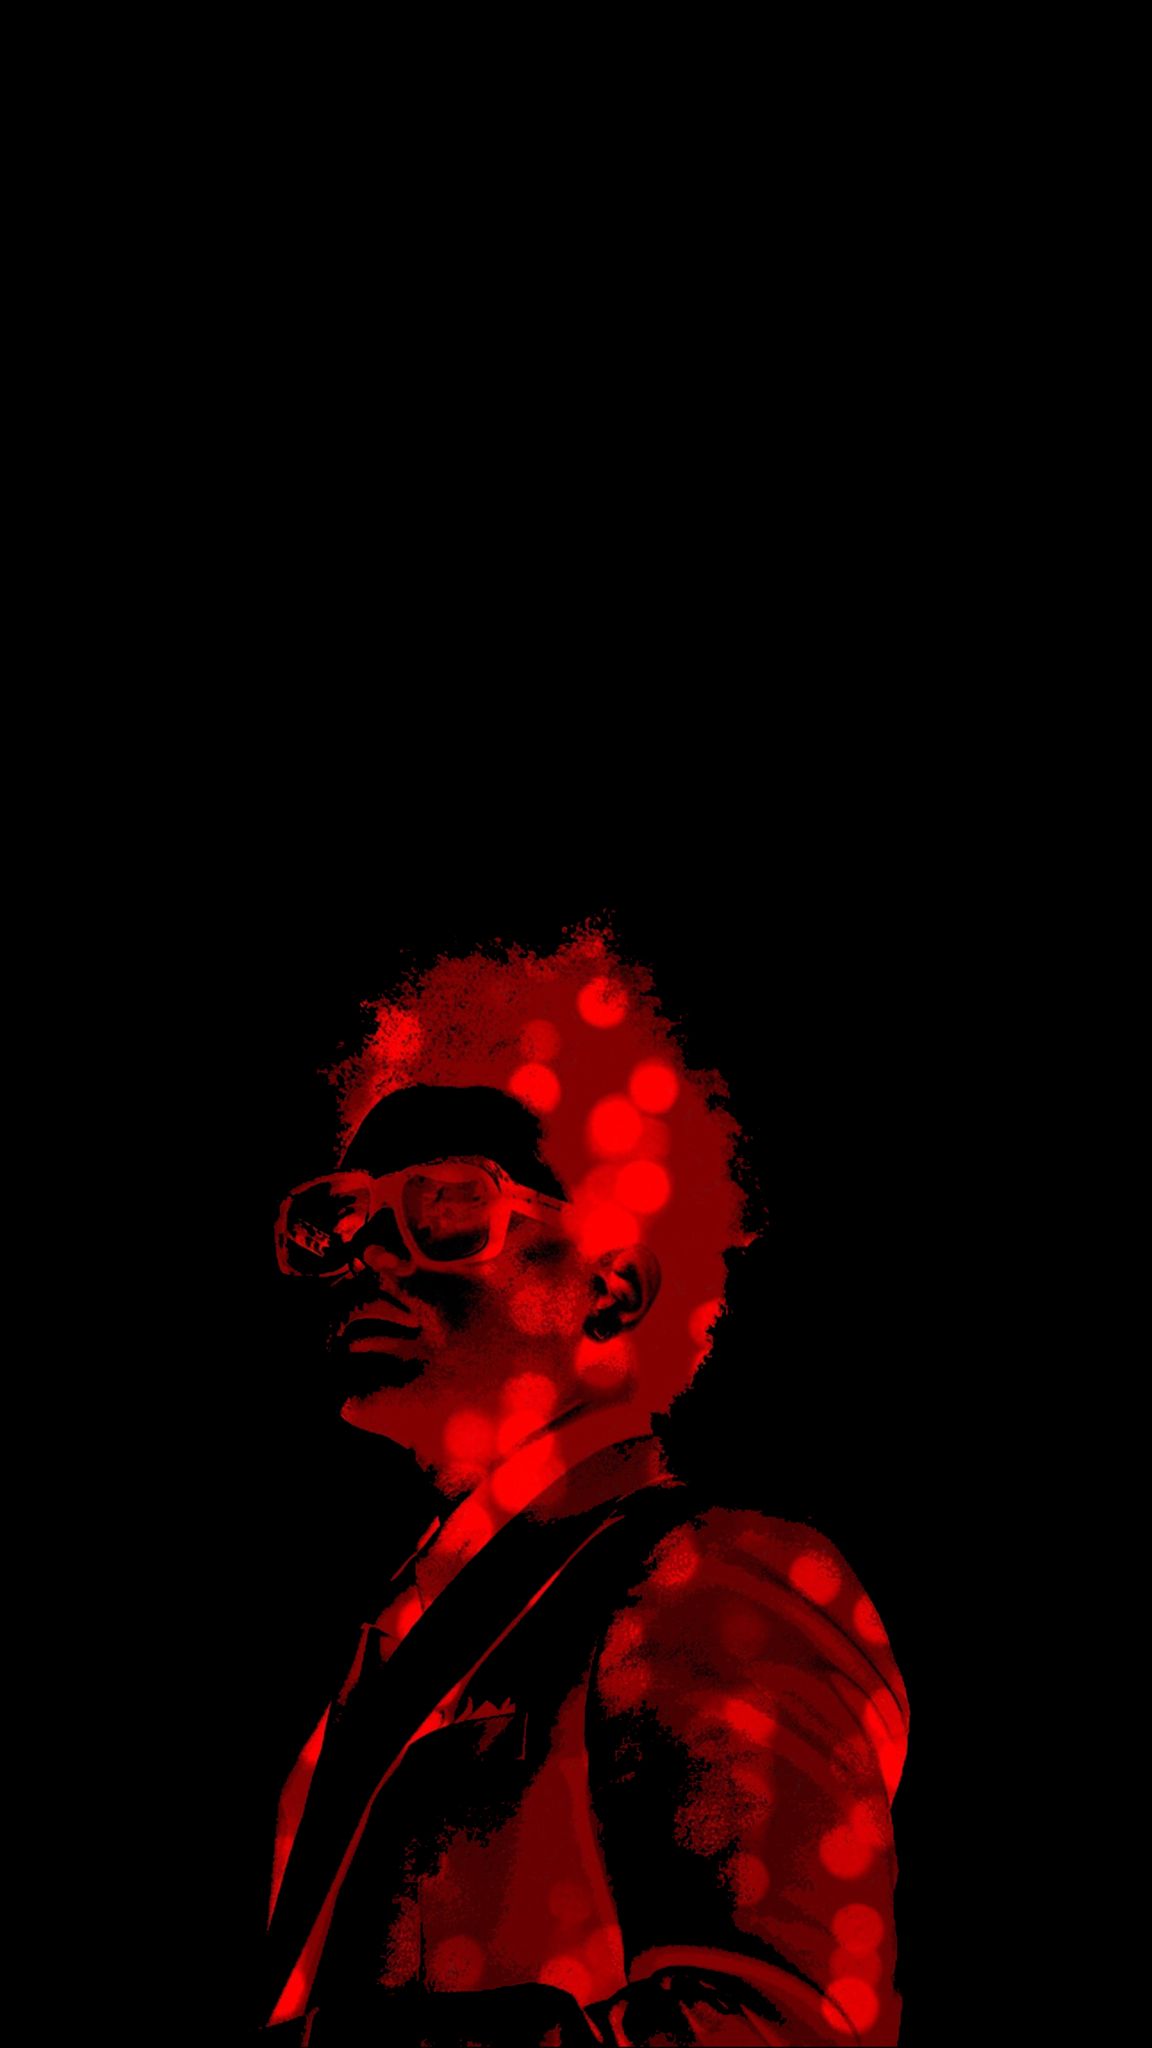 The Weeknd wallpaper for iPhone and Android phone - The Weeknd